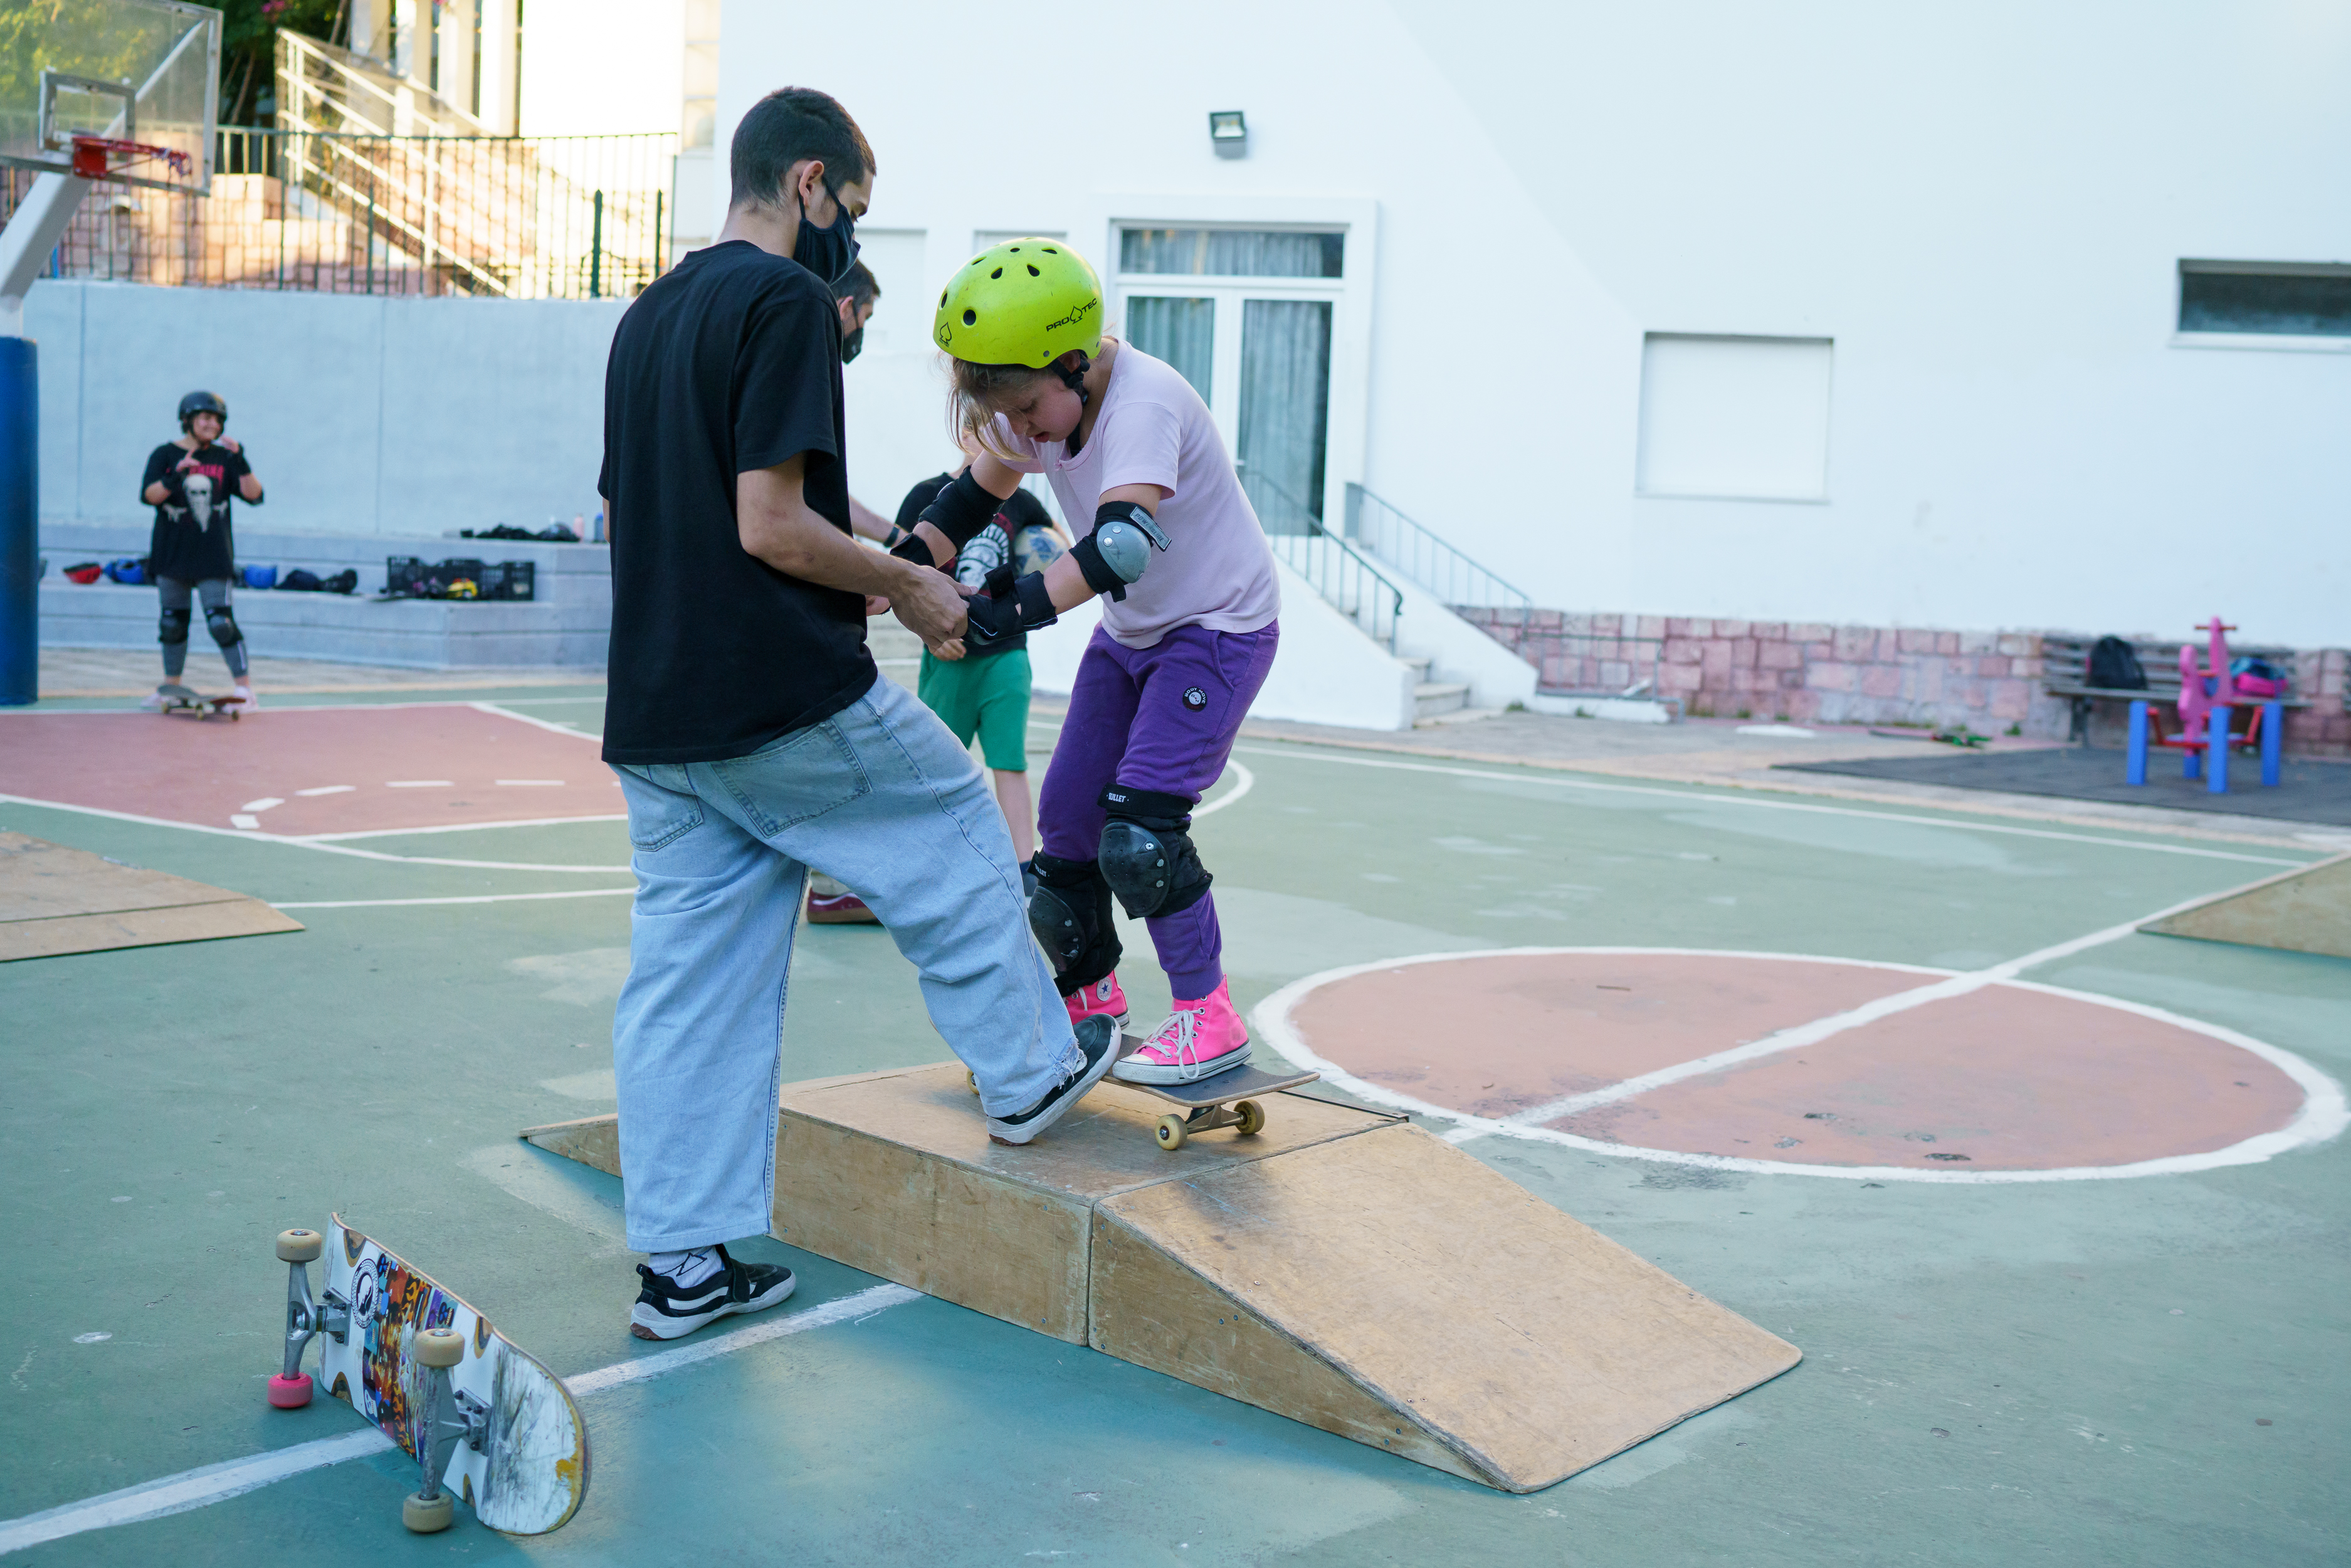 Sharing the Stories of the Unseen in Skateboarding: Hannah Bailey Visits FMS in Athens